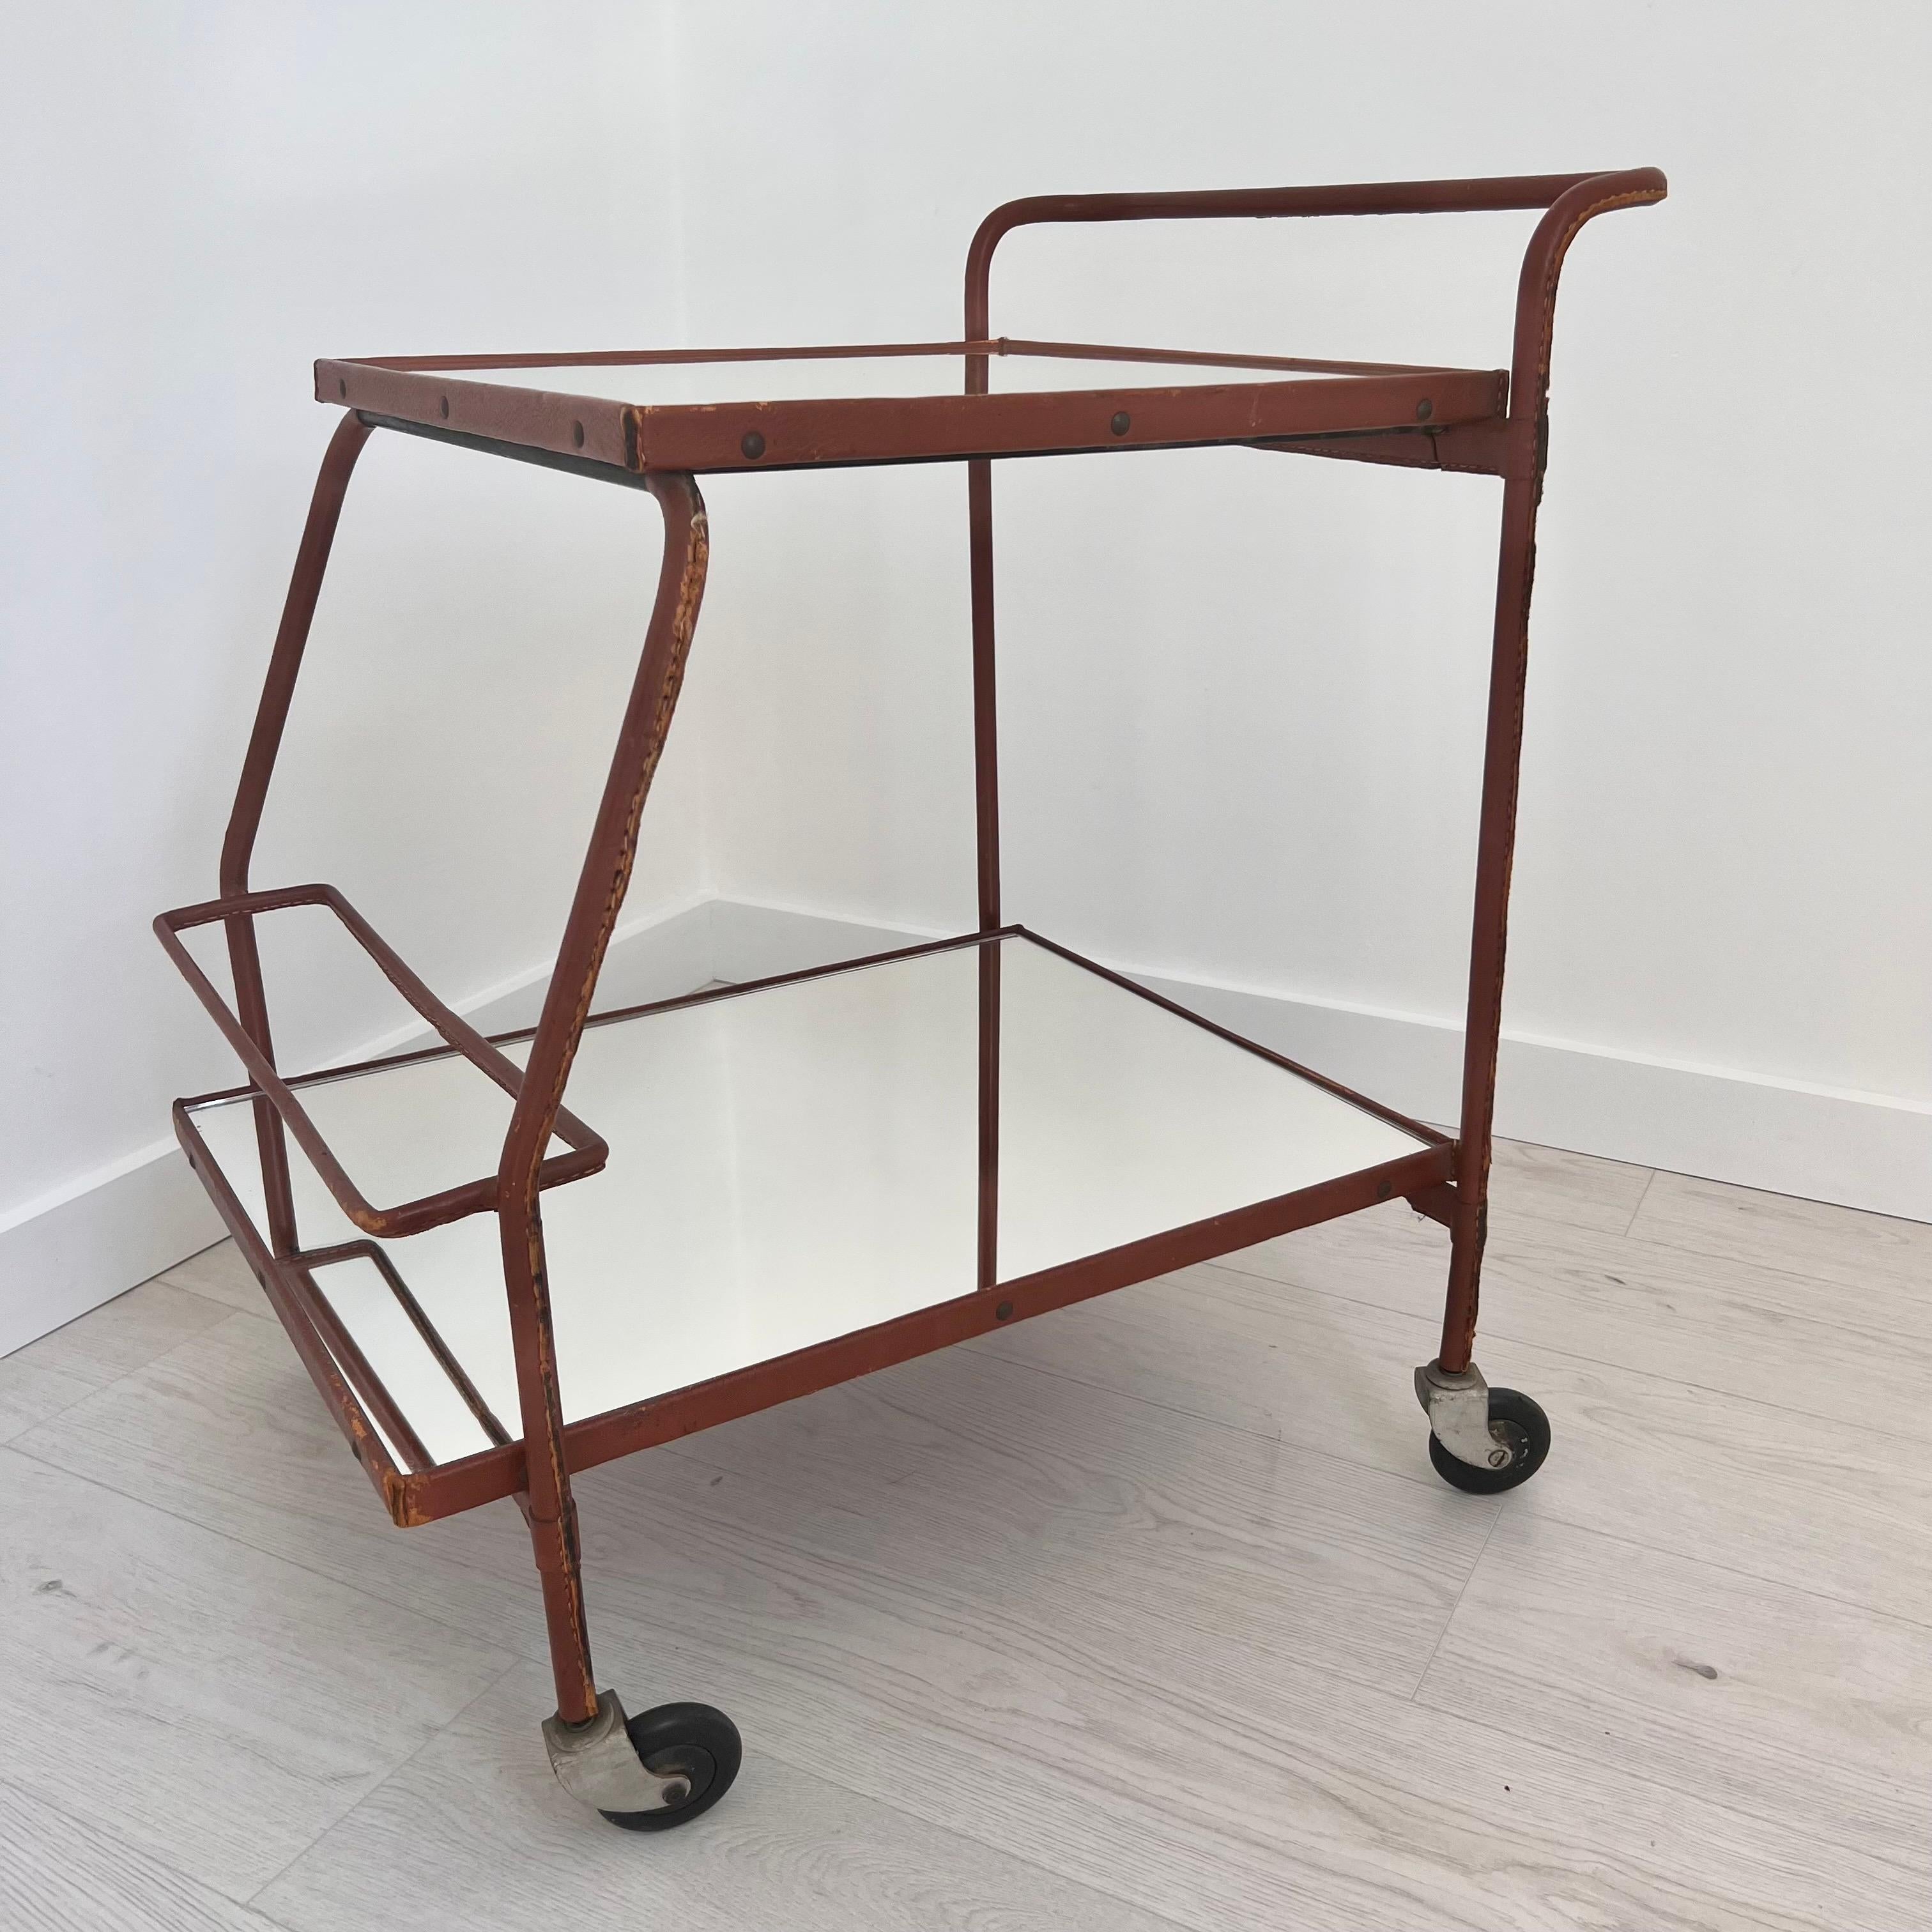 Stunning bar cart by French art deco modernist designer, Jacques Adnet. This piece comes completely wrapped in a brown leather. Good vintage condition. Iron frame with 4 original casters which all roll and swivel 360 degrees. Serving cart features